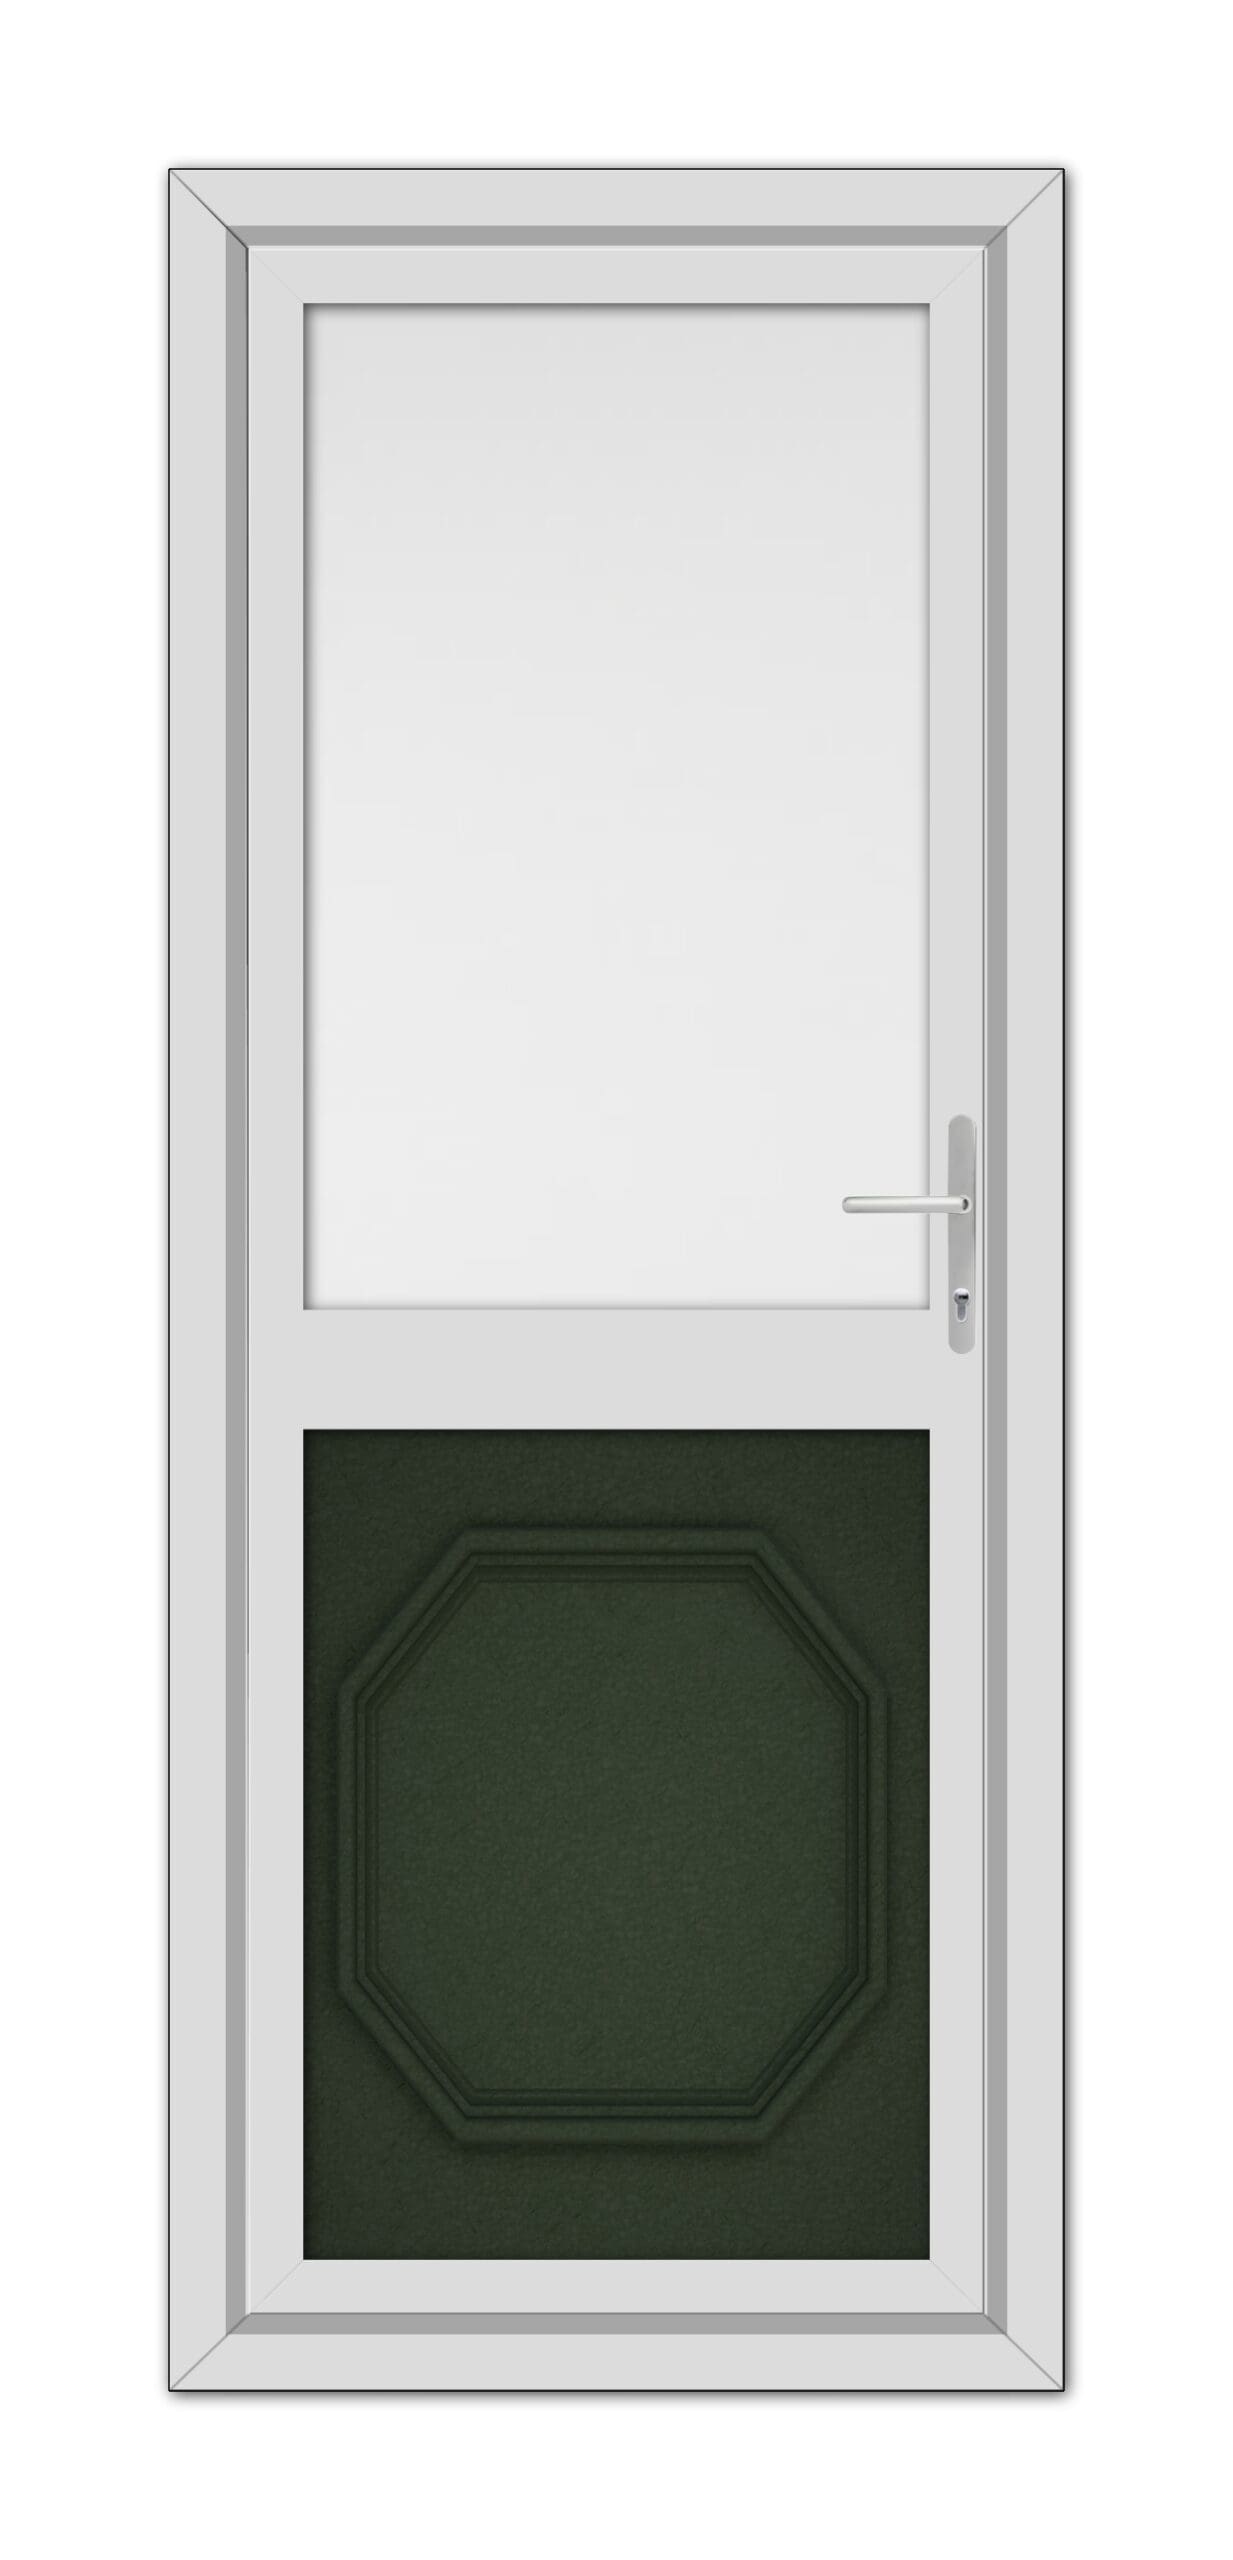 A modern Green Buckingham Half uPVC Back Door with a high window at the top and an octagonal, green panel at the bottom, featuring a metal handle on the right side.